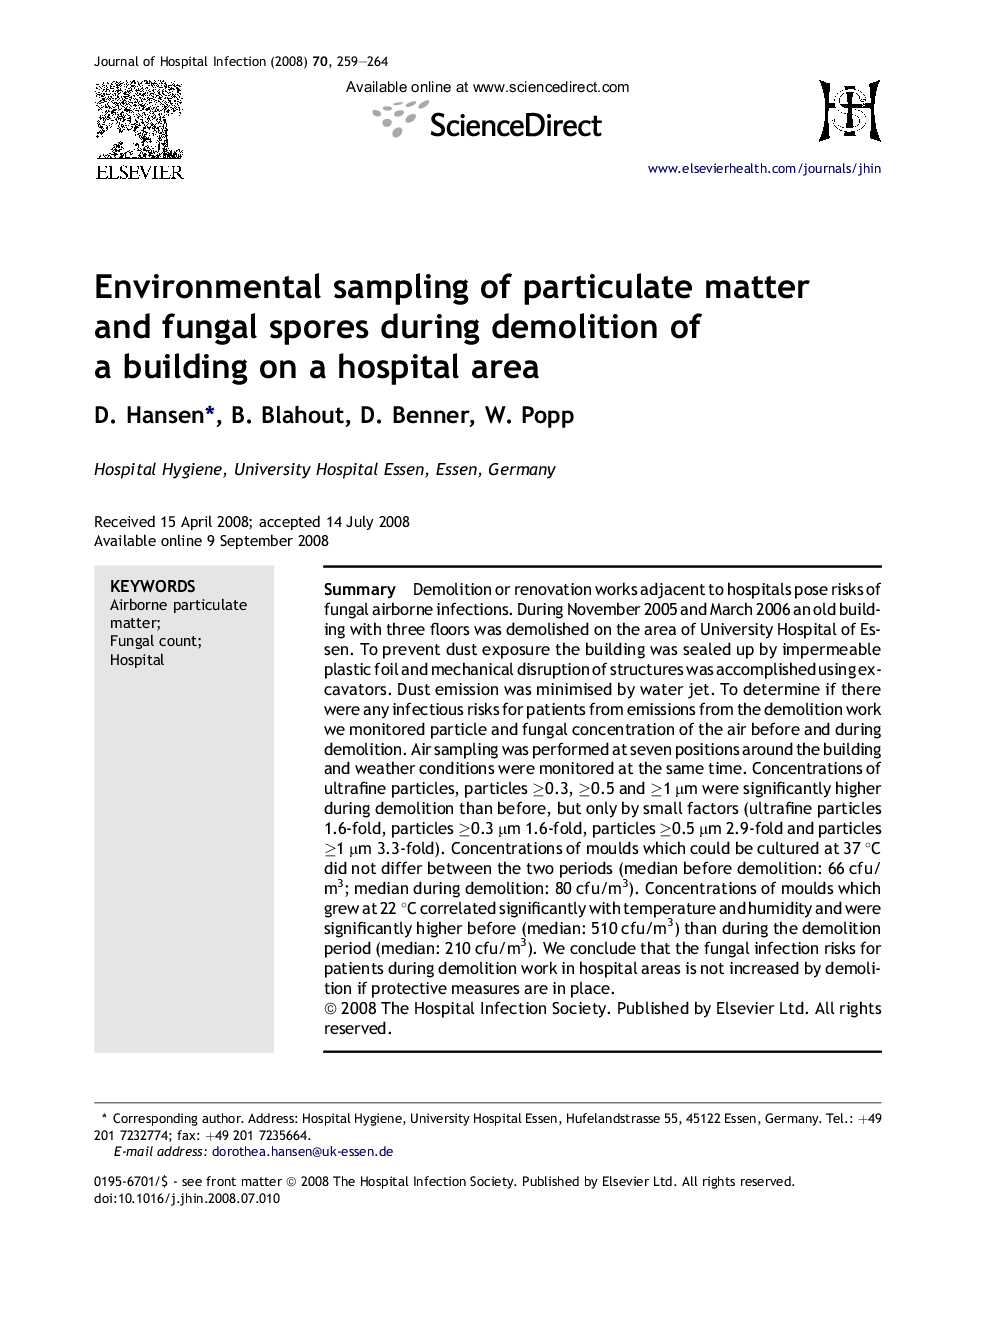 Environmental sampling of particulate matter and fungal spores during demolition of a building on a hospital area